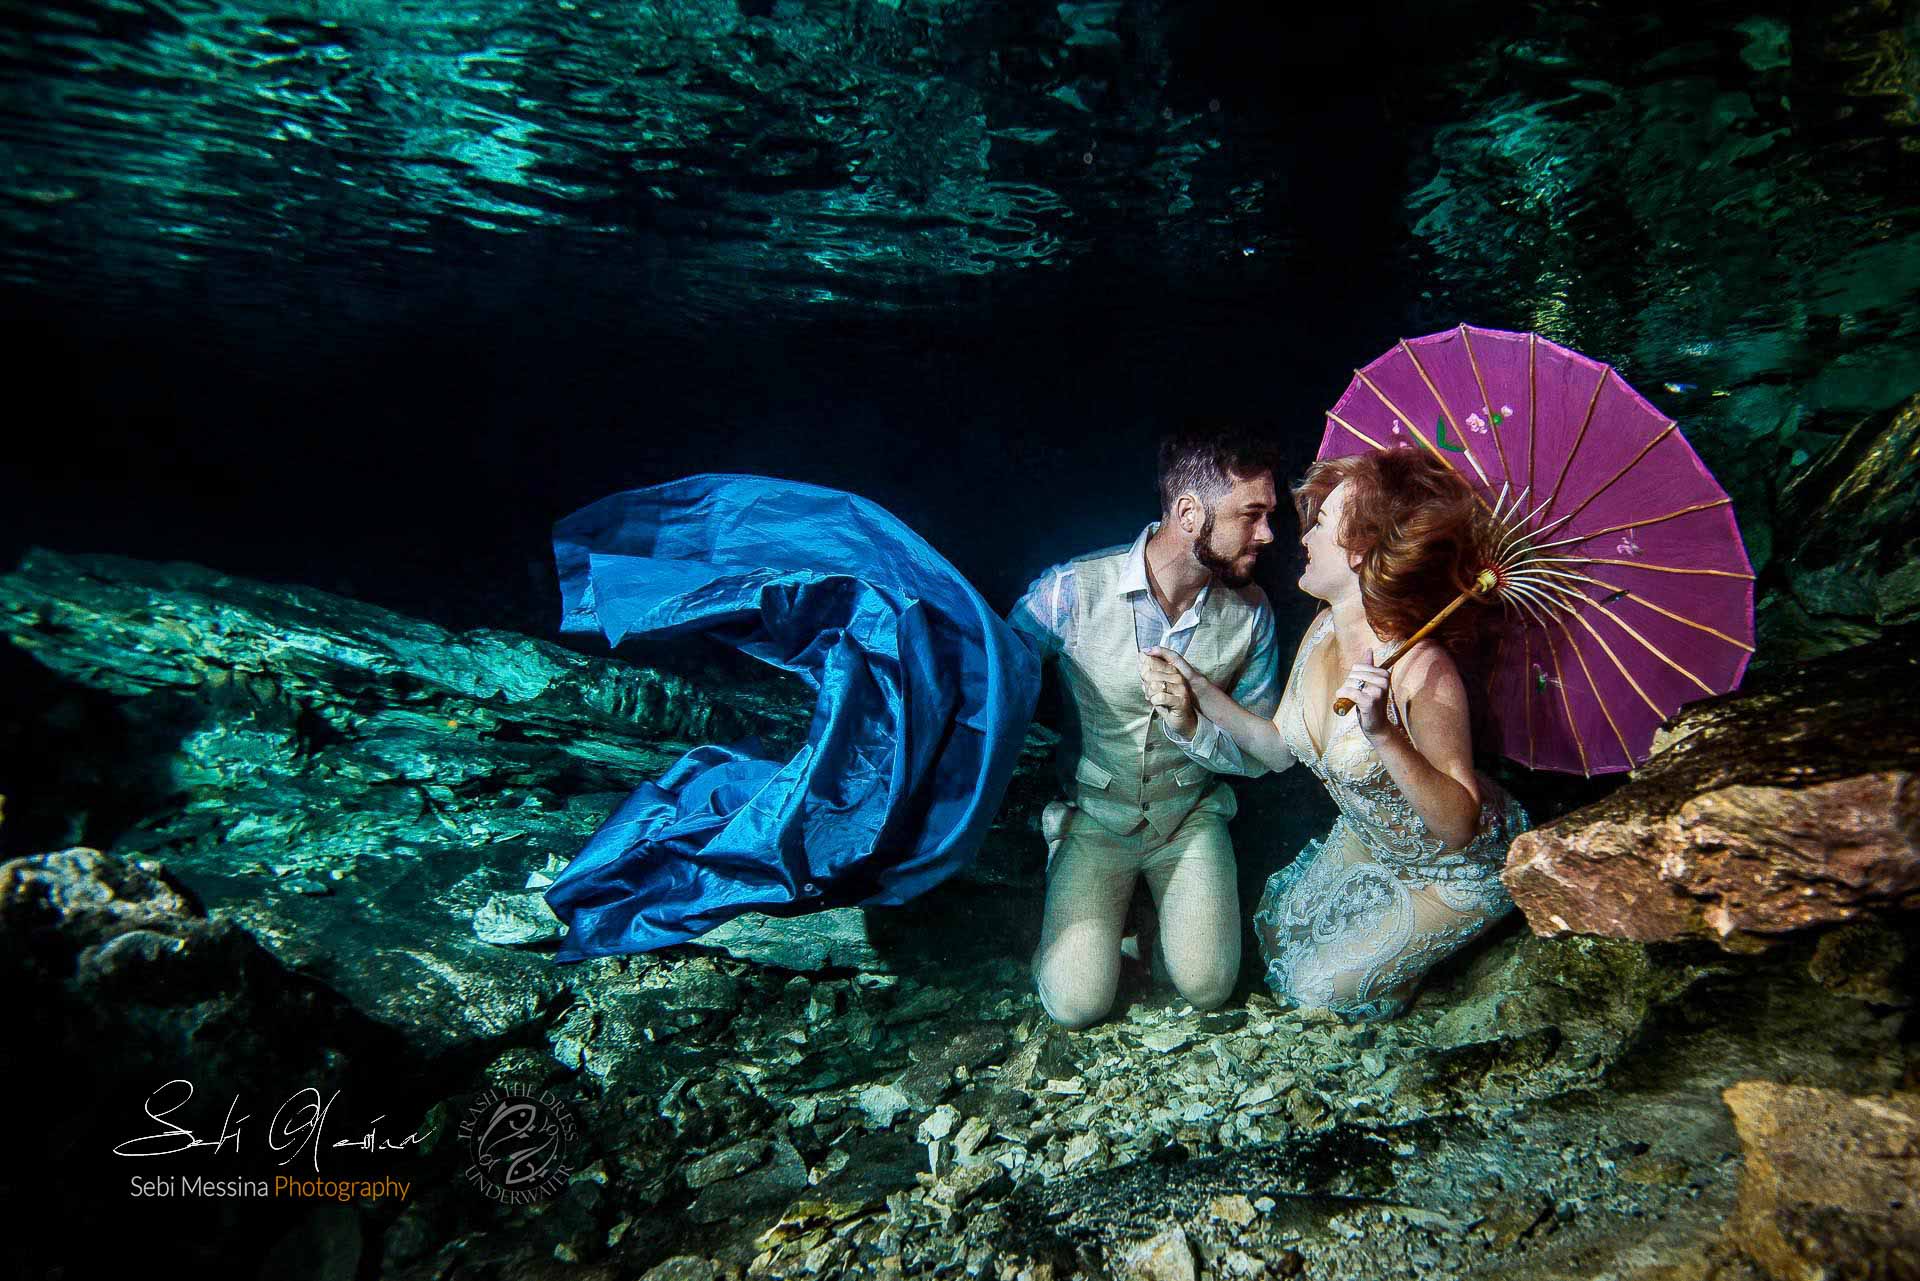 Underwater Trash The Dress in a Mexican cenote – Sebi Messina Photography